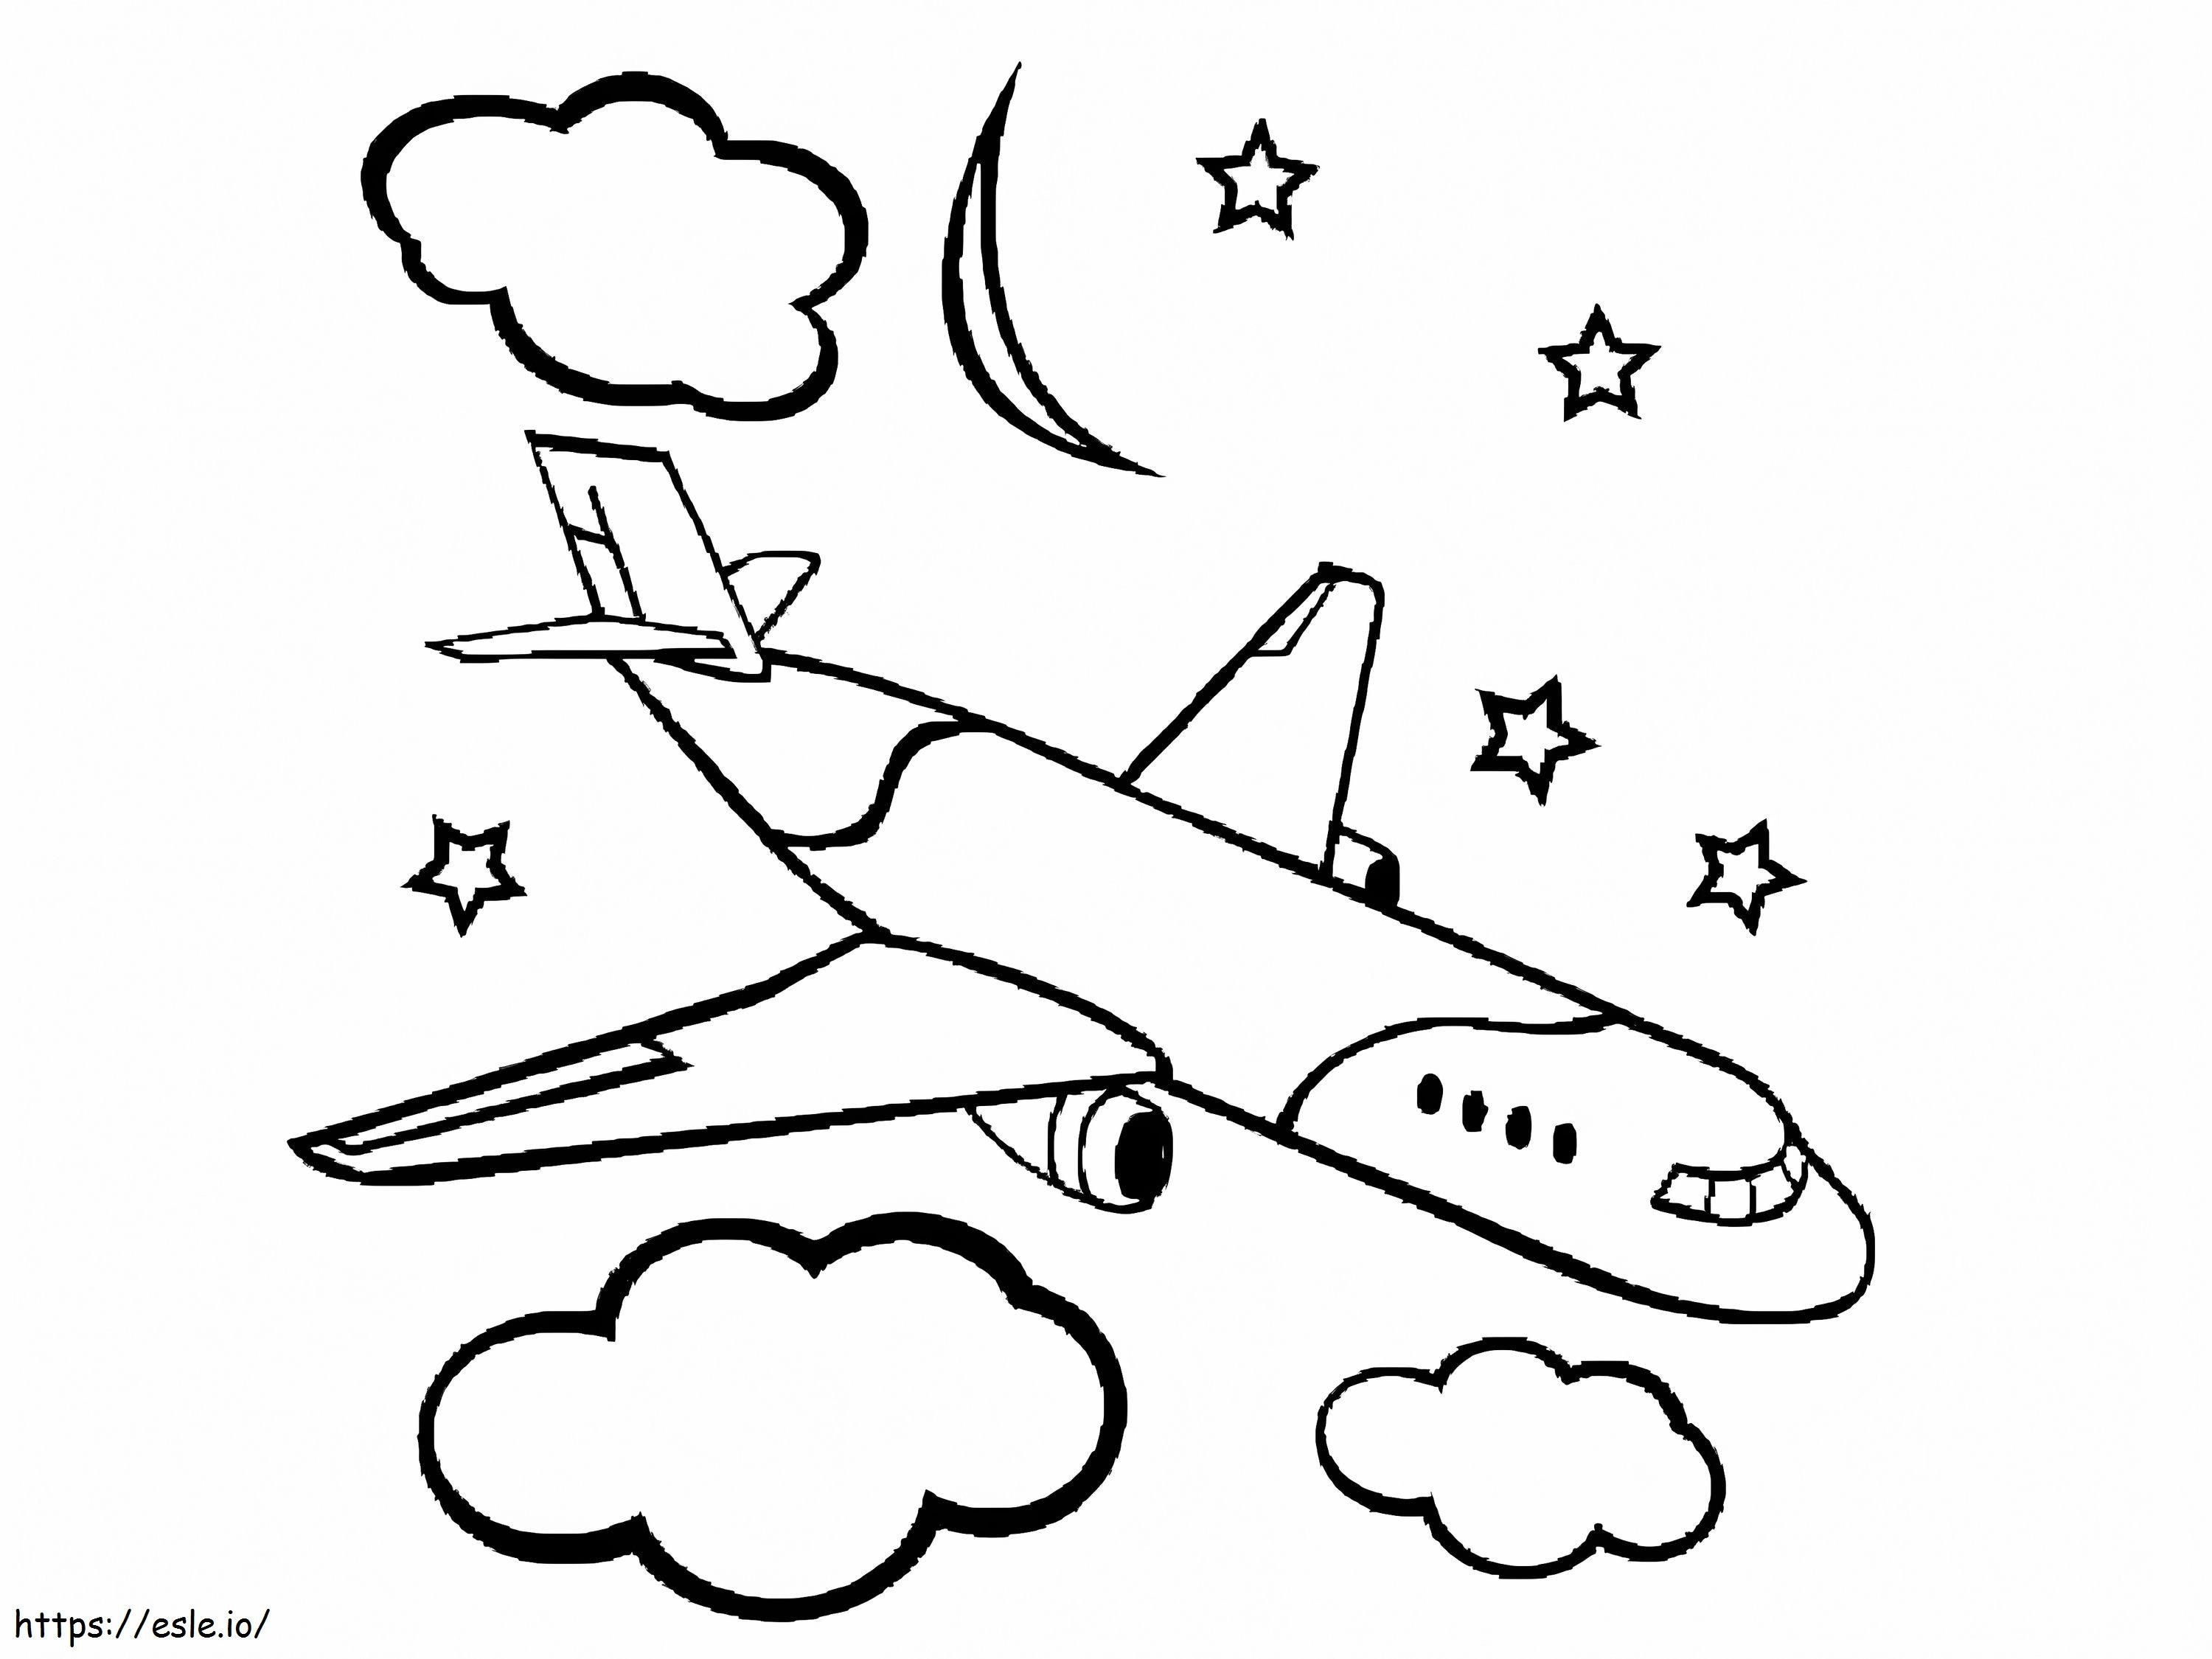 Plane With Stars And Clouds coloring page